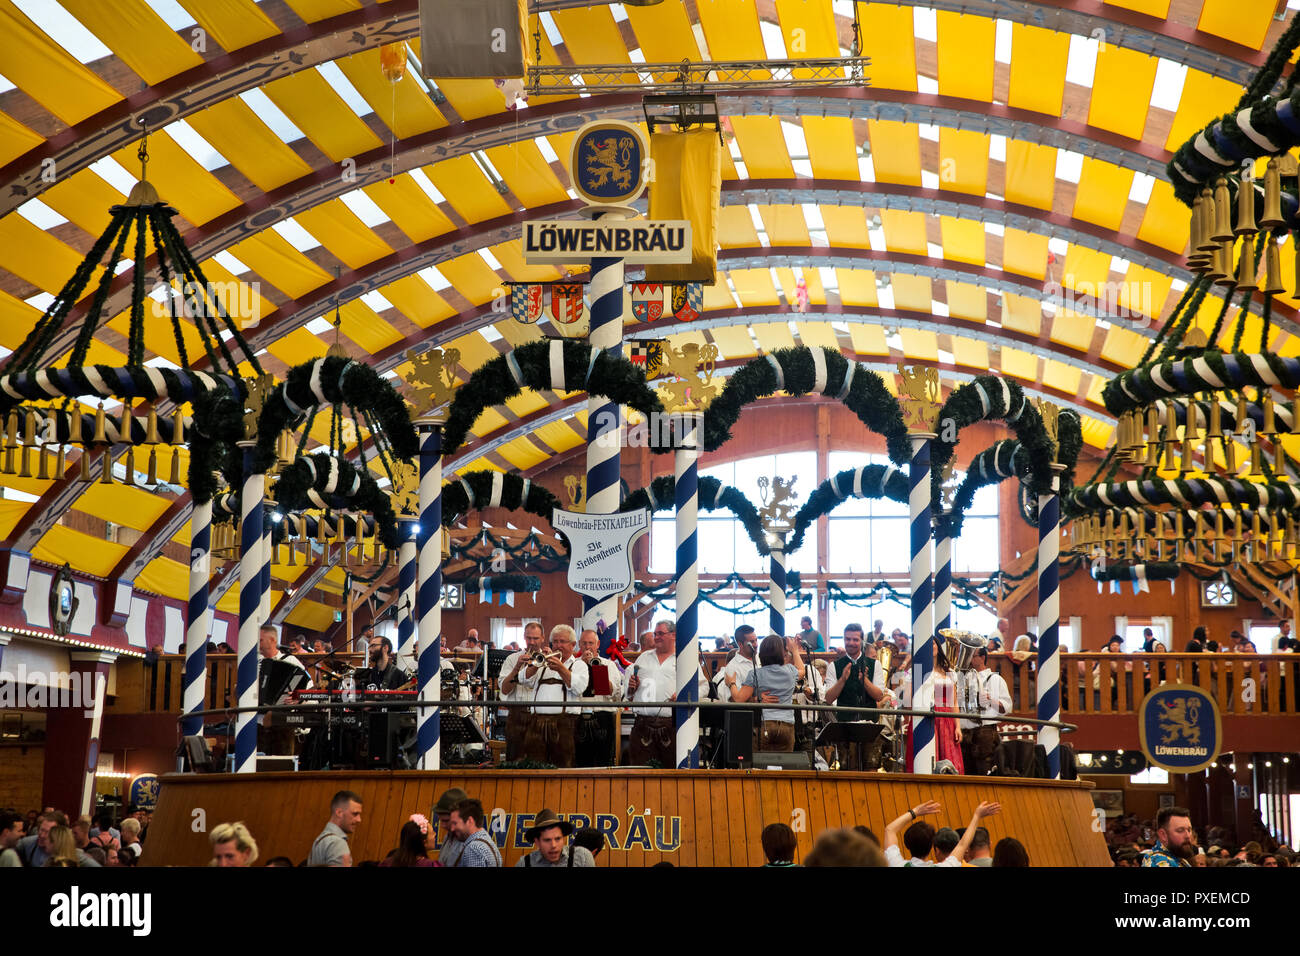 Crowd of people in Lowenbrau tent in Munich city, Germany Stock Photo